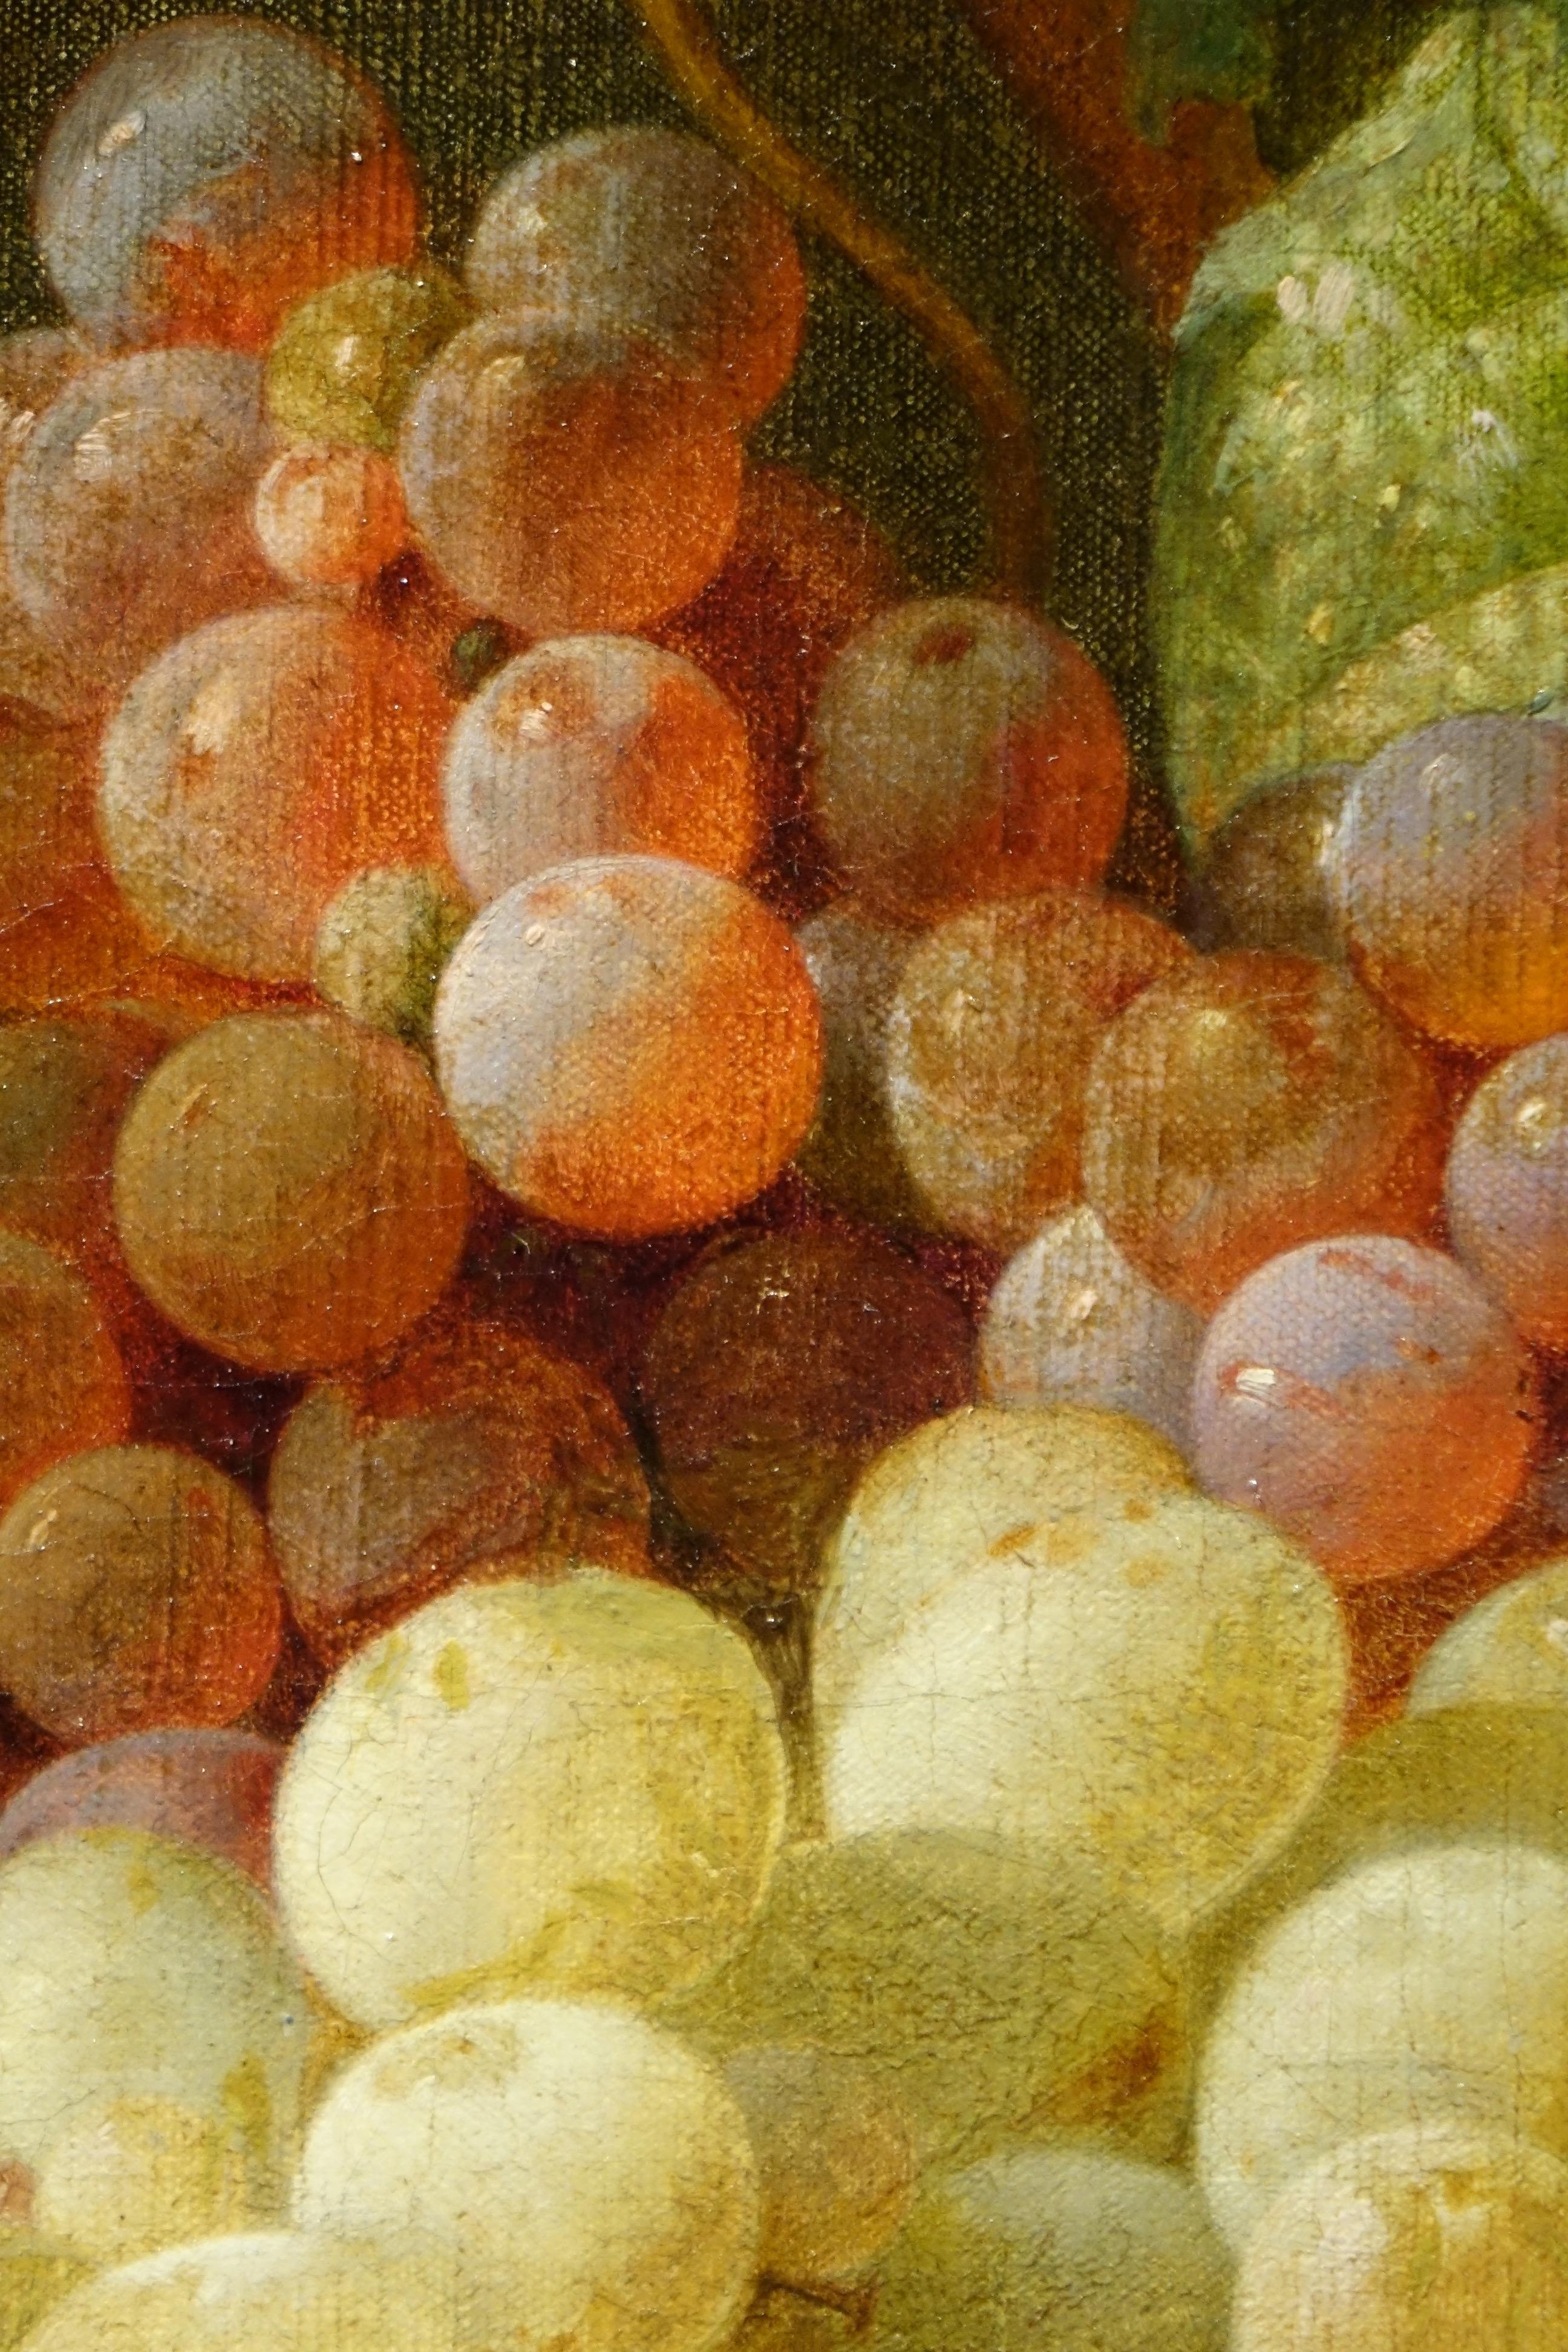 Mid-19th Century Still Life with Grapes Painting Signed Claudius Pizzetty 1866, French School